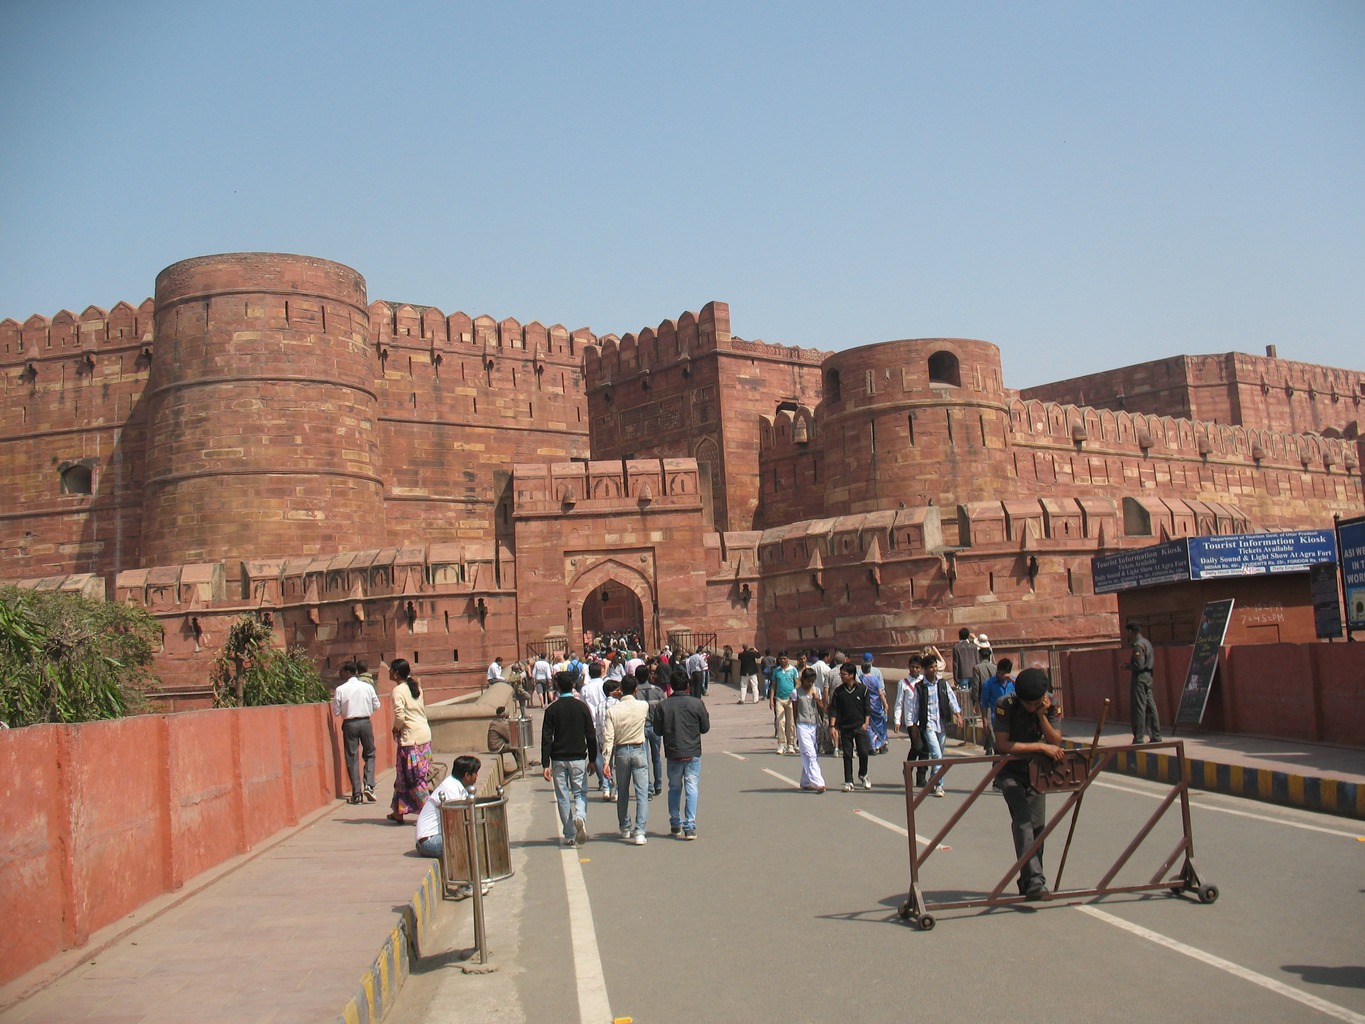 http://s3.picofile.com/file/8197378042/6119830_Entrance_to_the_fort_Agra.jpg